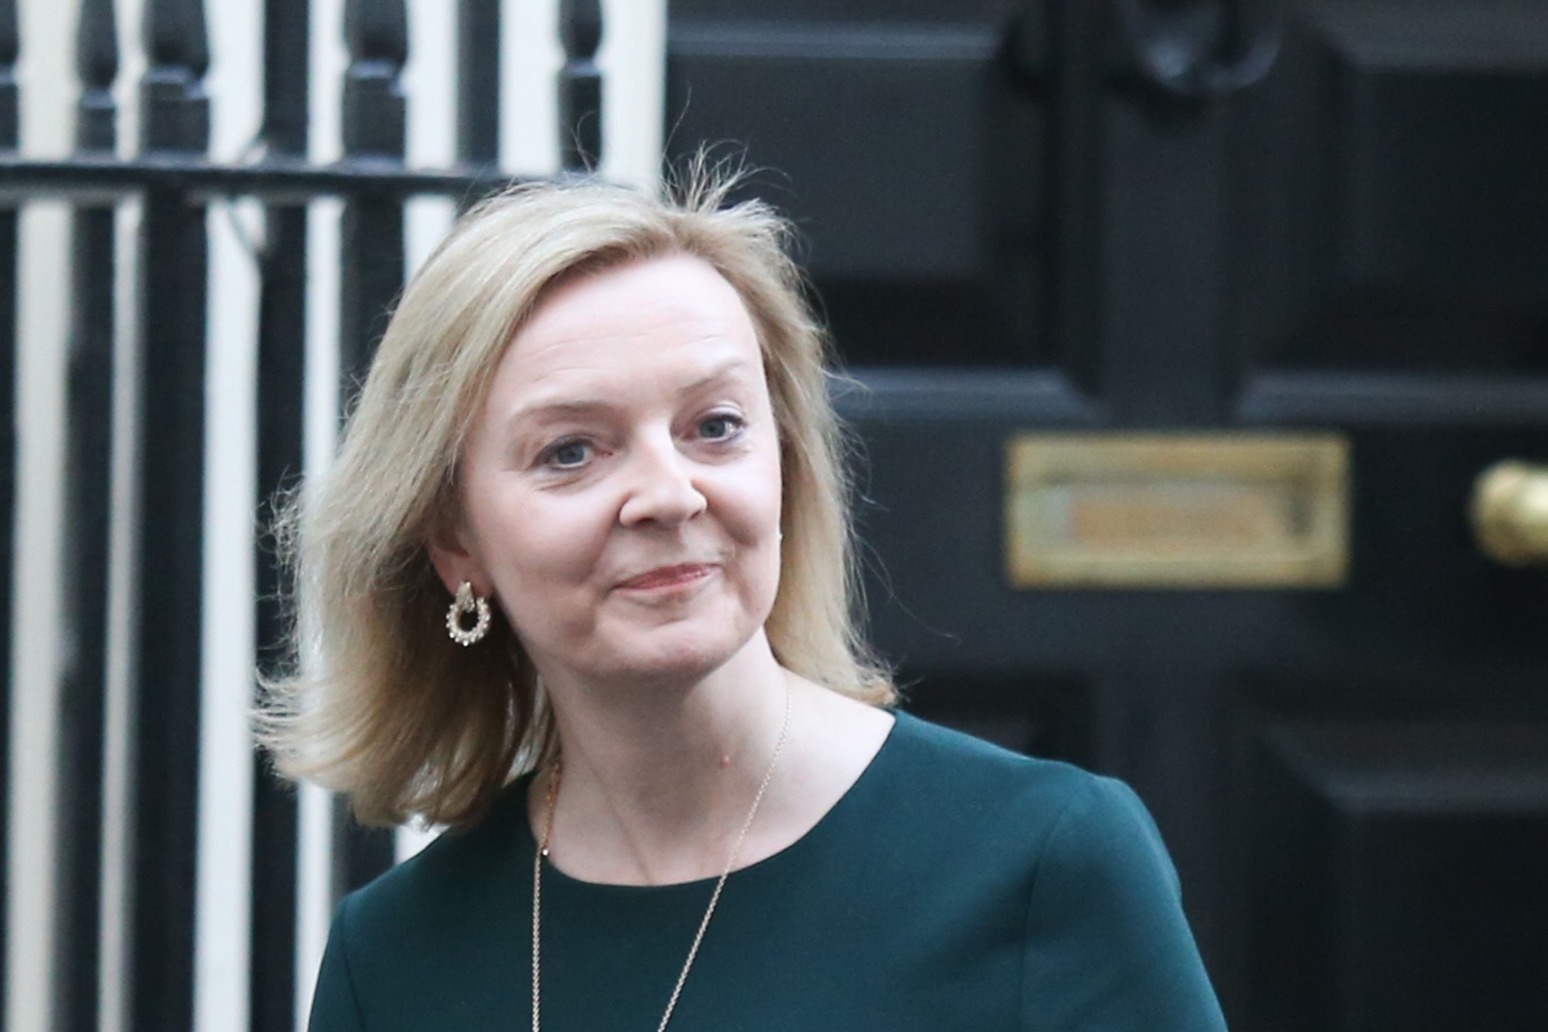 Liz Truss fears peace talks are a ‘smokescreen’ for further Russian aggression 